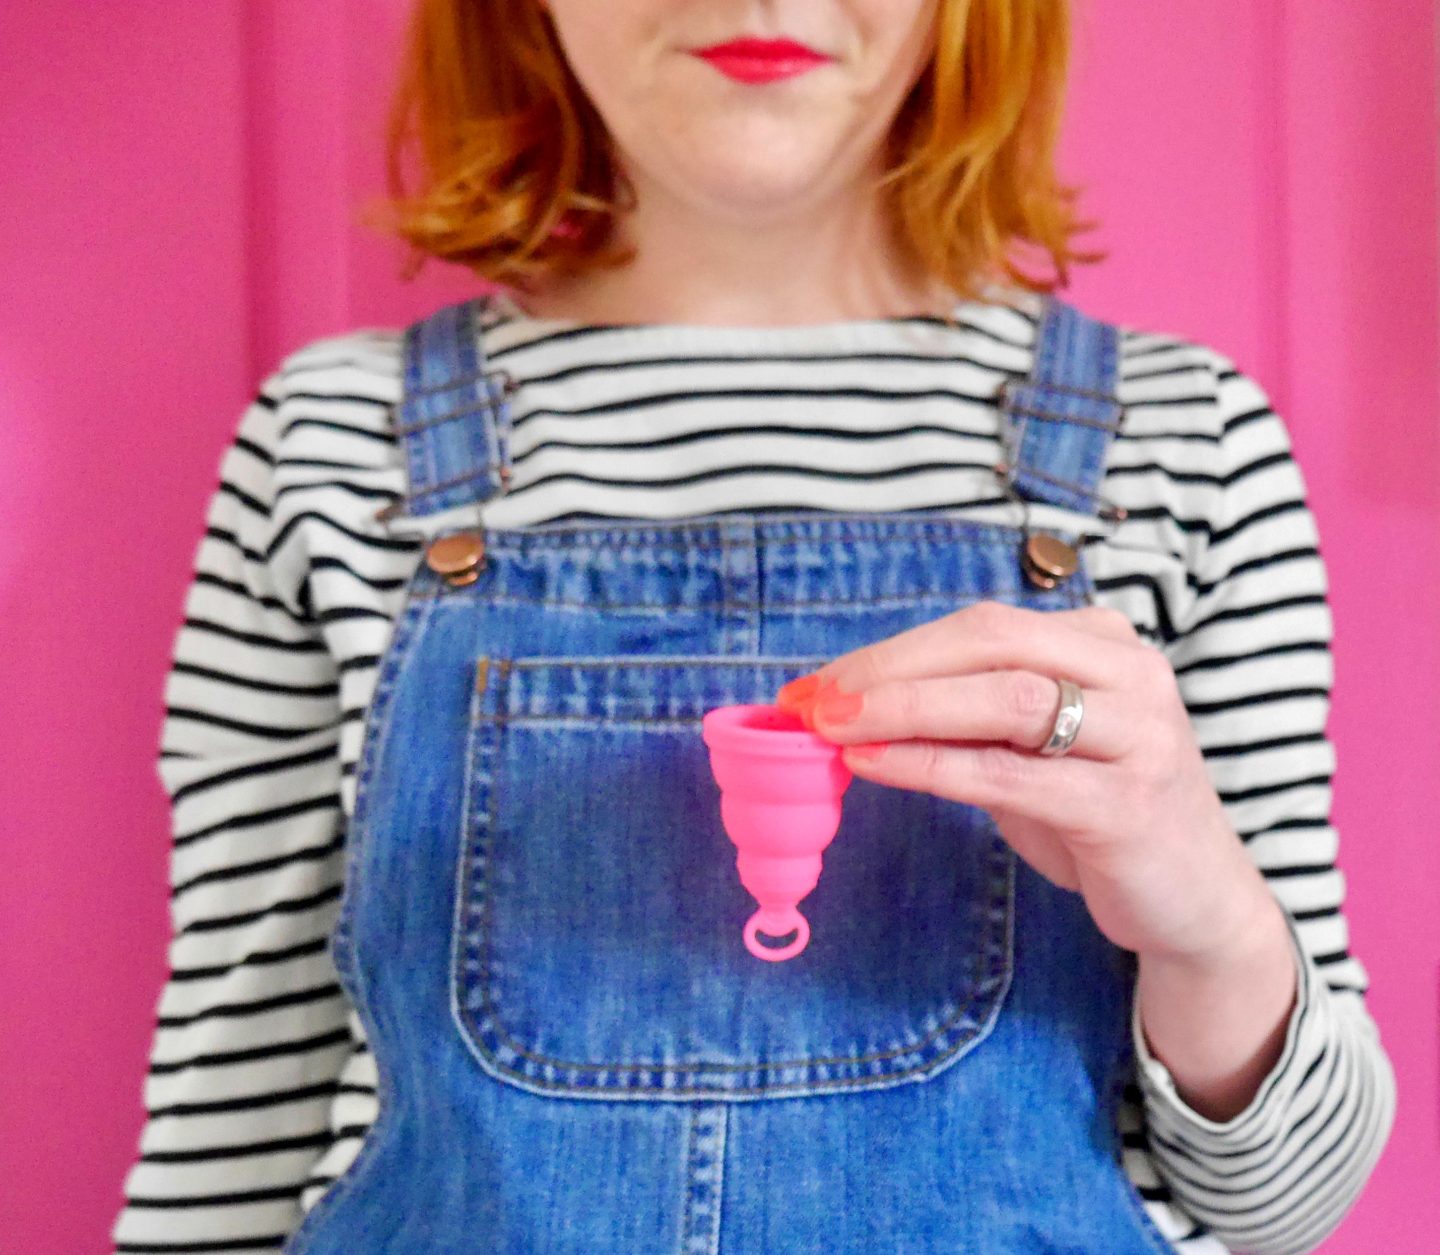 Lily Cup One review - I try out the Lilly Cup menstrual cup 